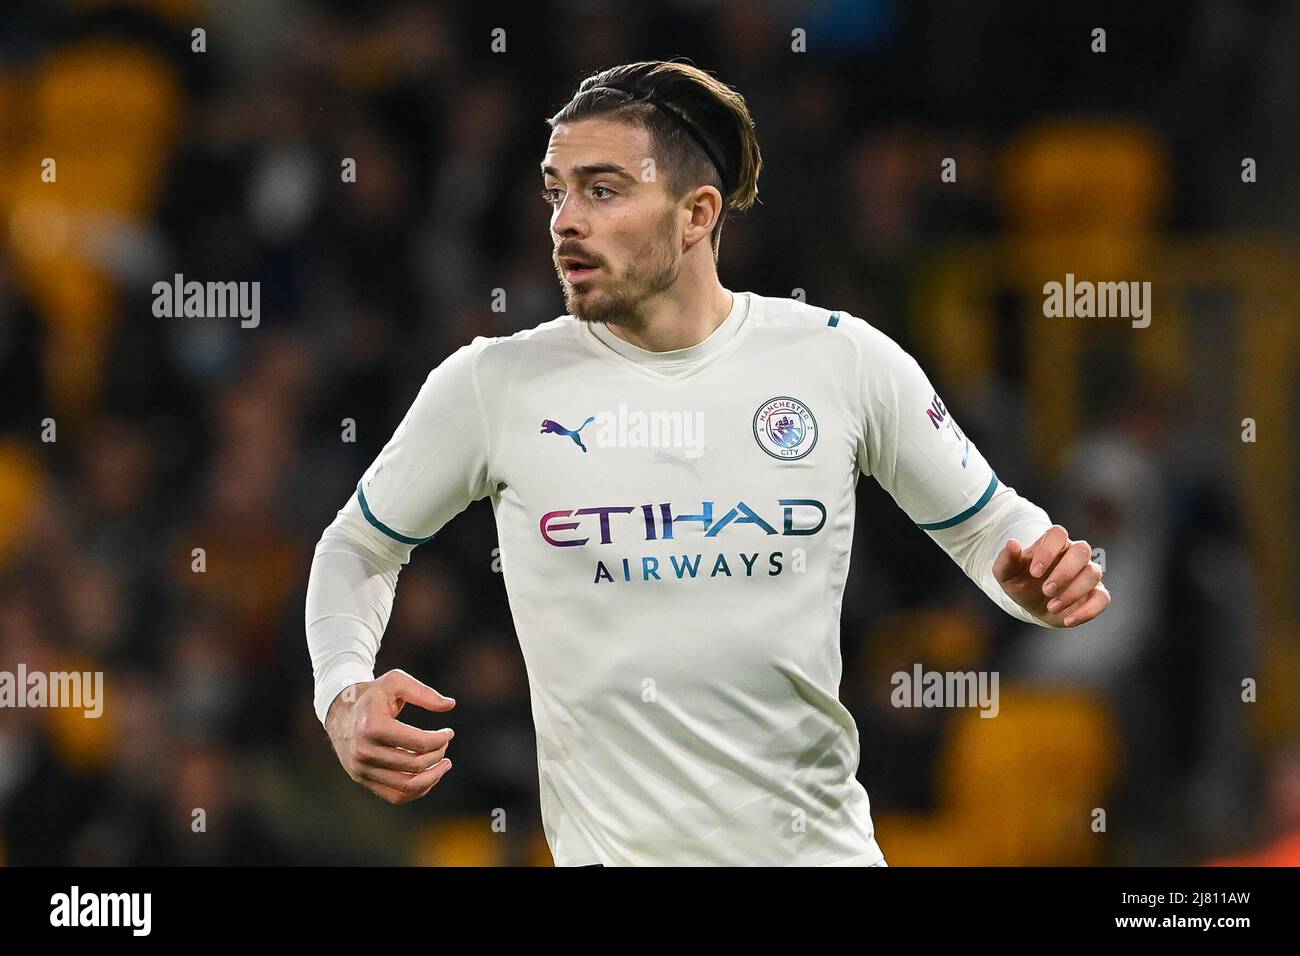 Jack Grealish #10 of Manchester City during the game Stock Photo